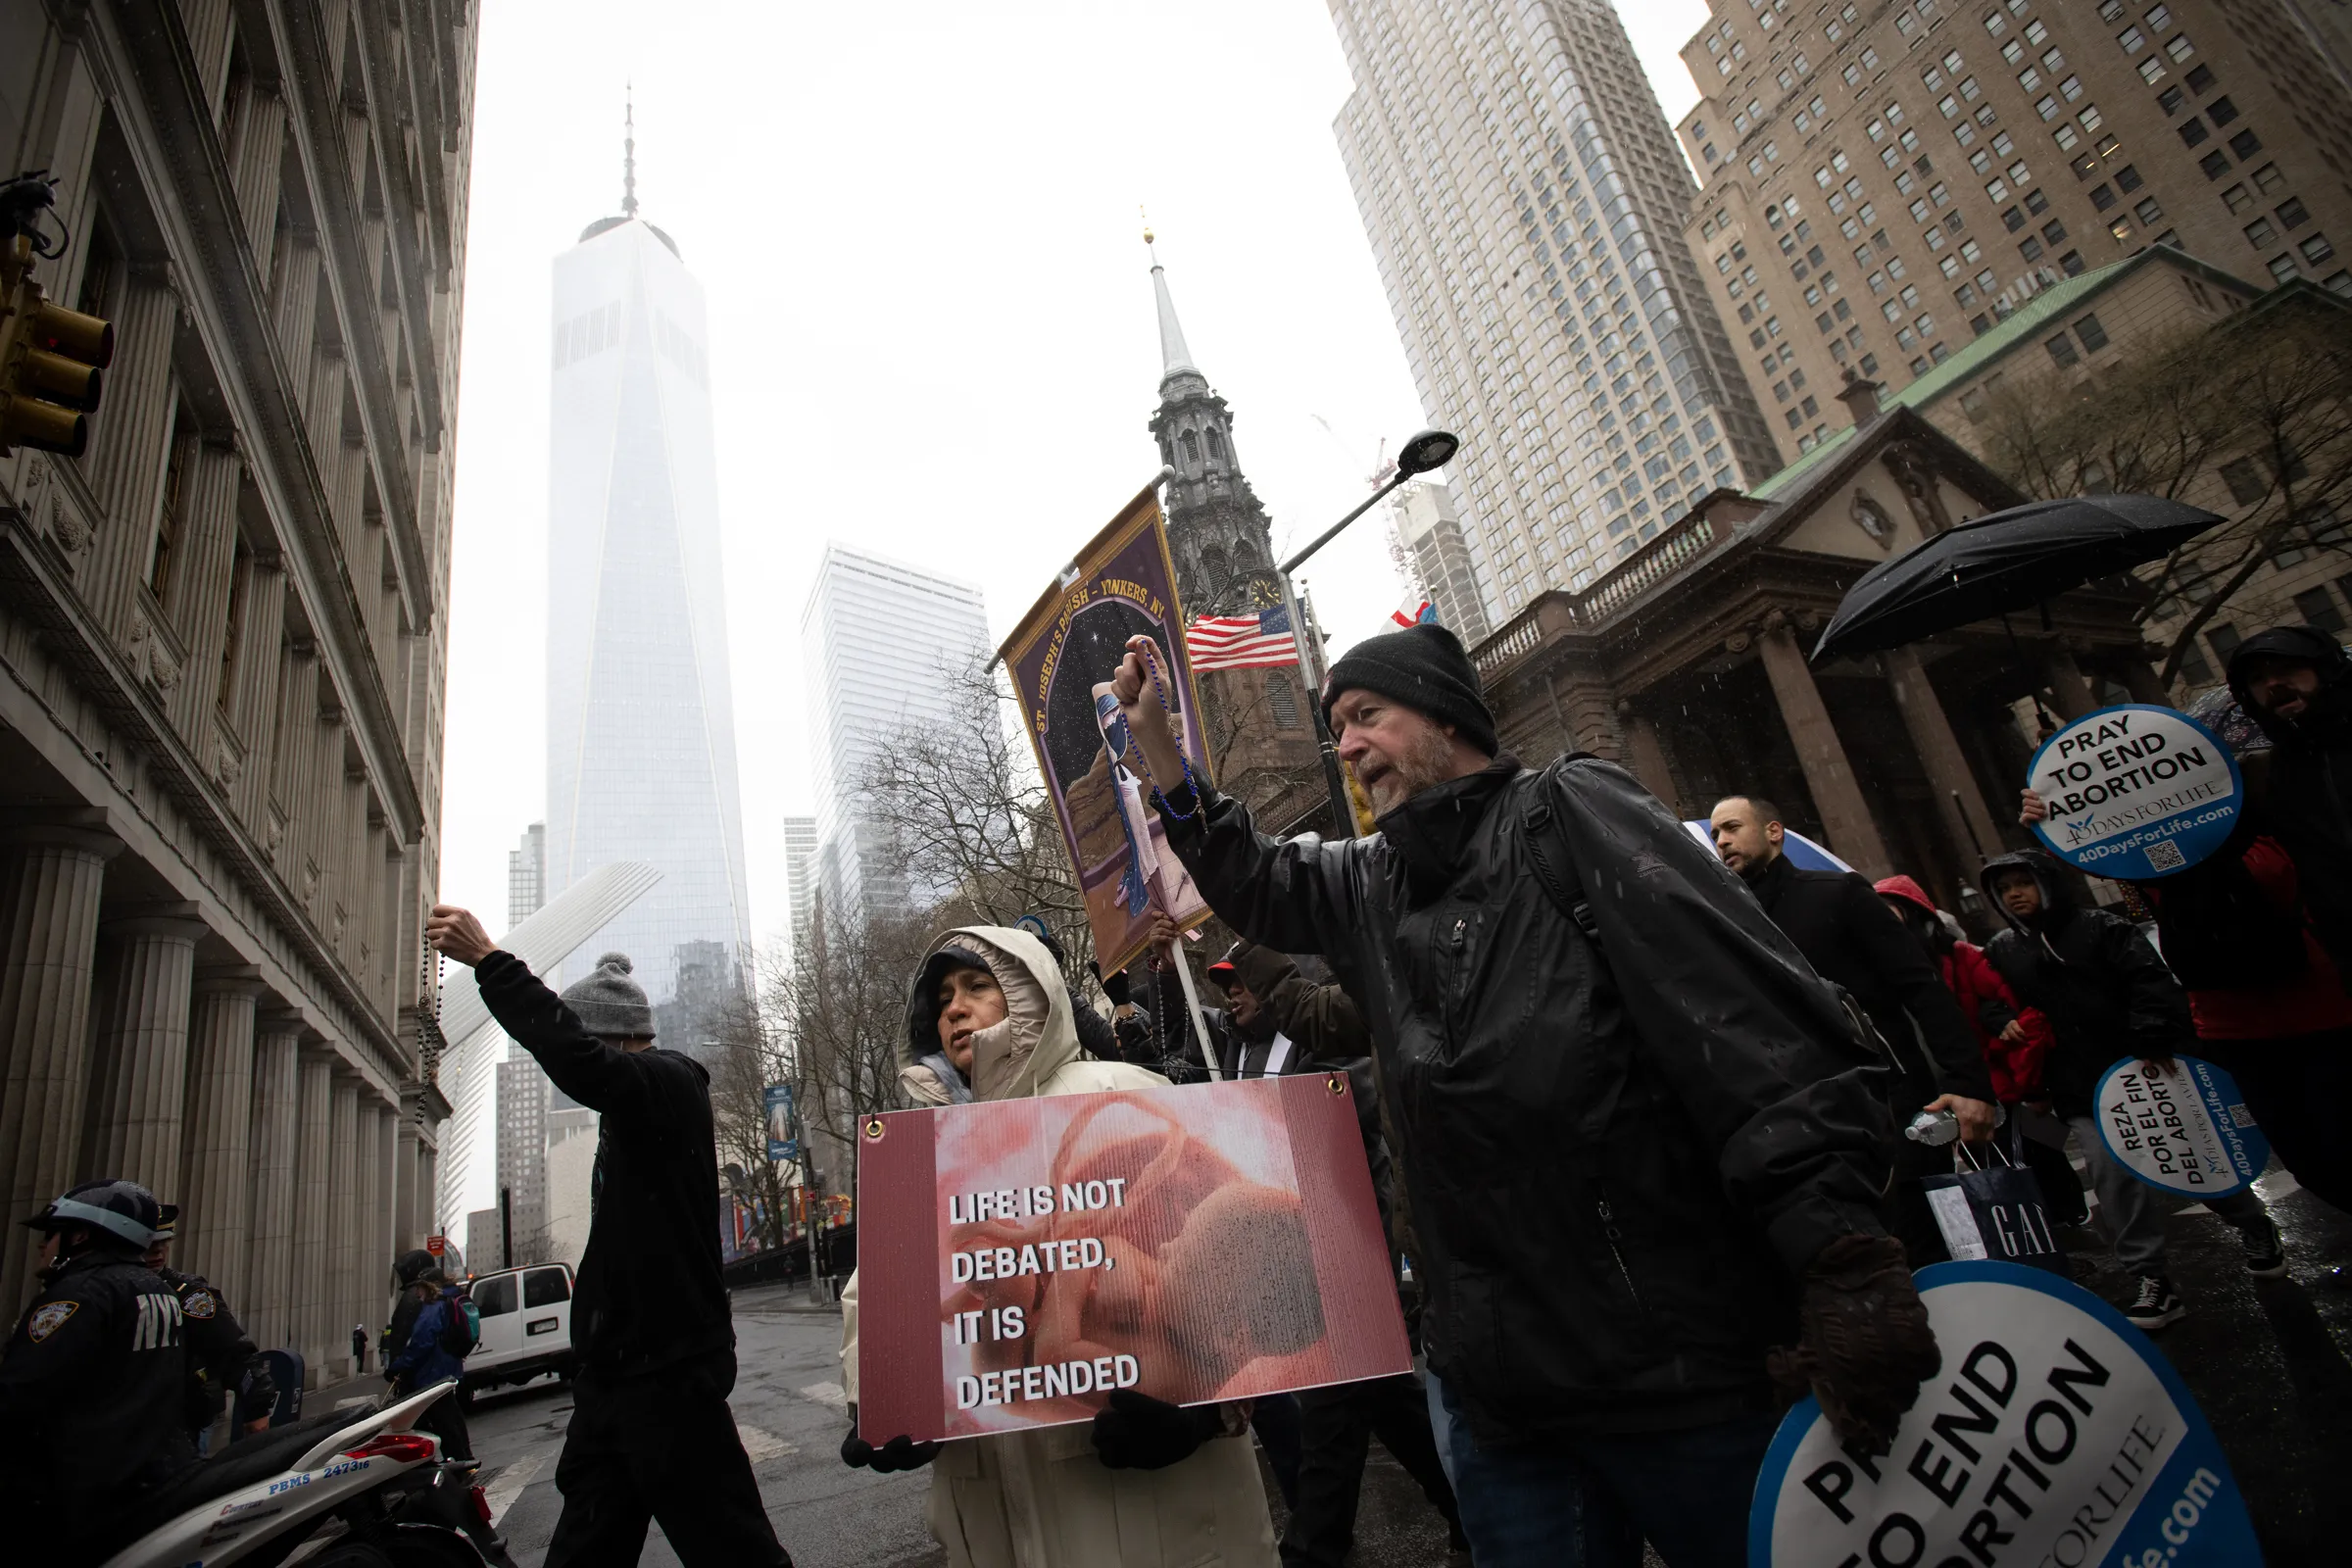 Michael Phelps of Good Counsel Homes prays the rosary with others as they pass Trinity Church in the shadow of the Freedom Tower in Lower Manhattan on March 25, 2023.?w=200&h=150